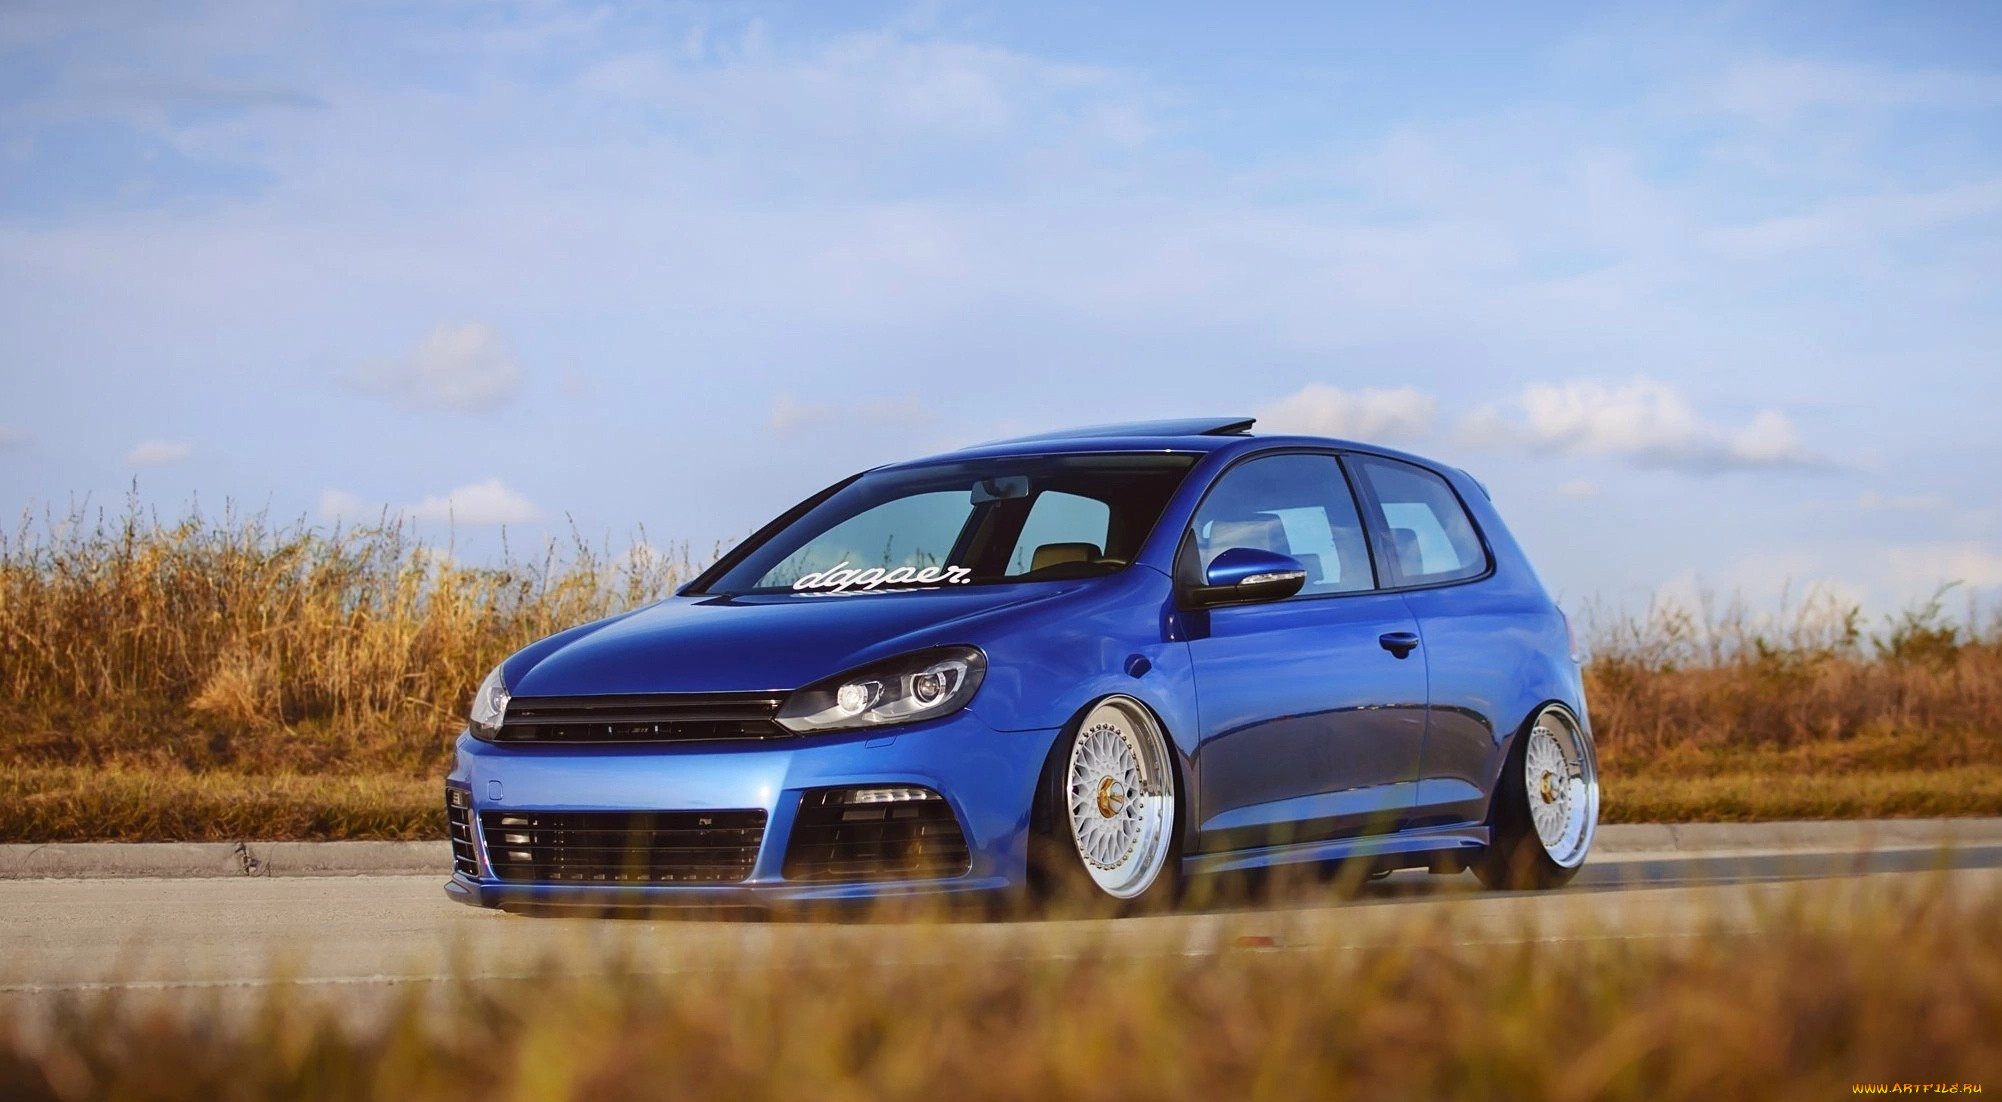 , volkswagen, , golf, tuning, bbs, low, stance, dropped, vag, 